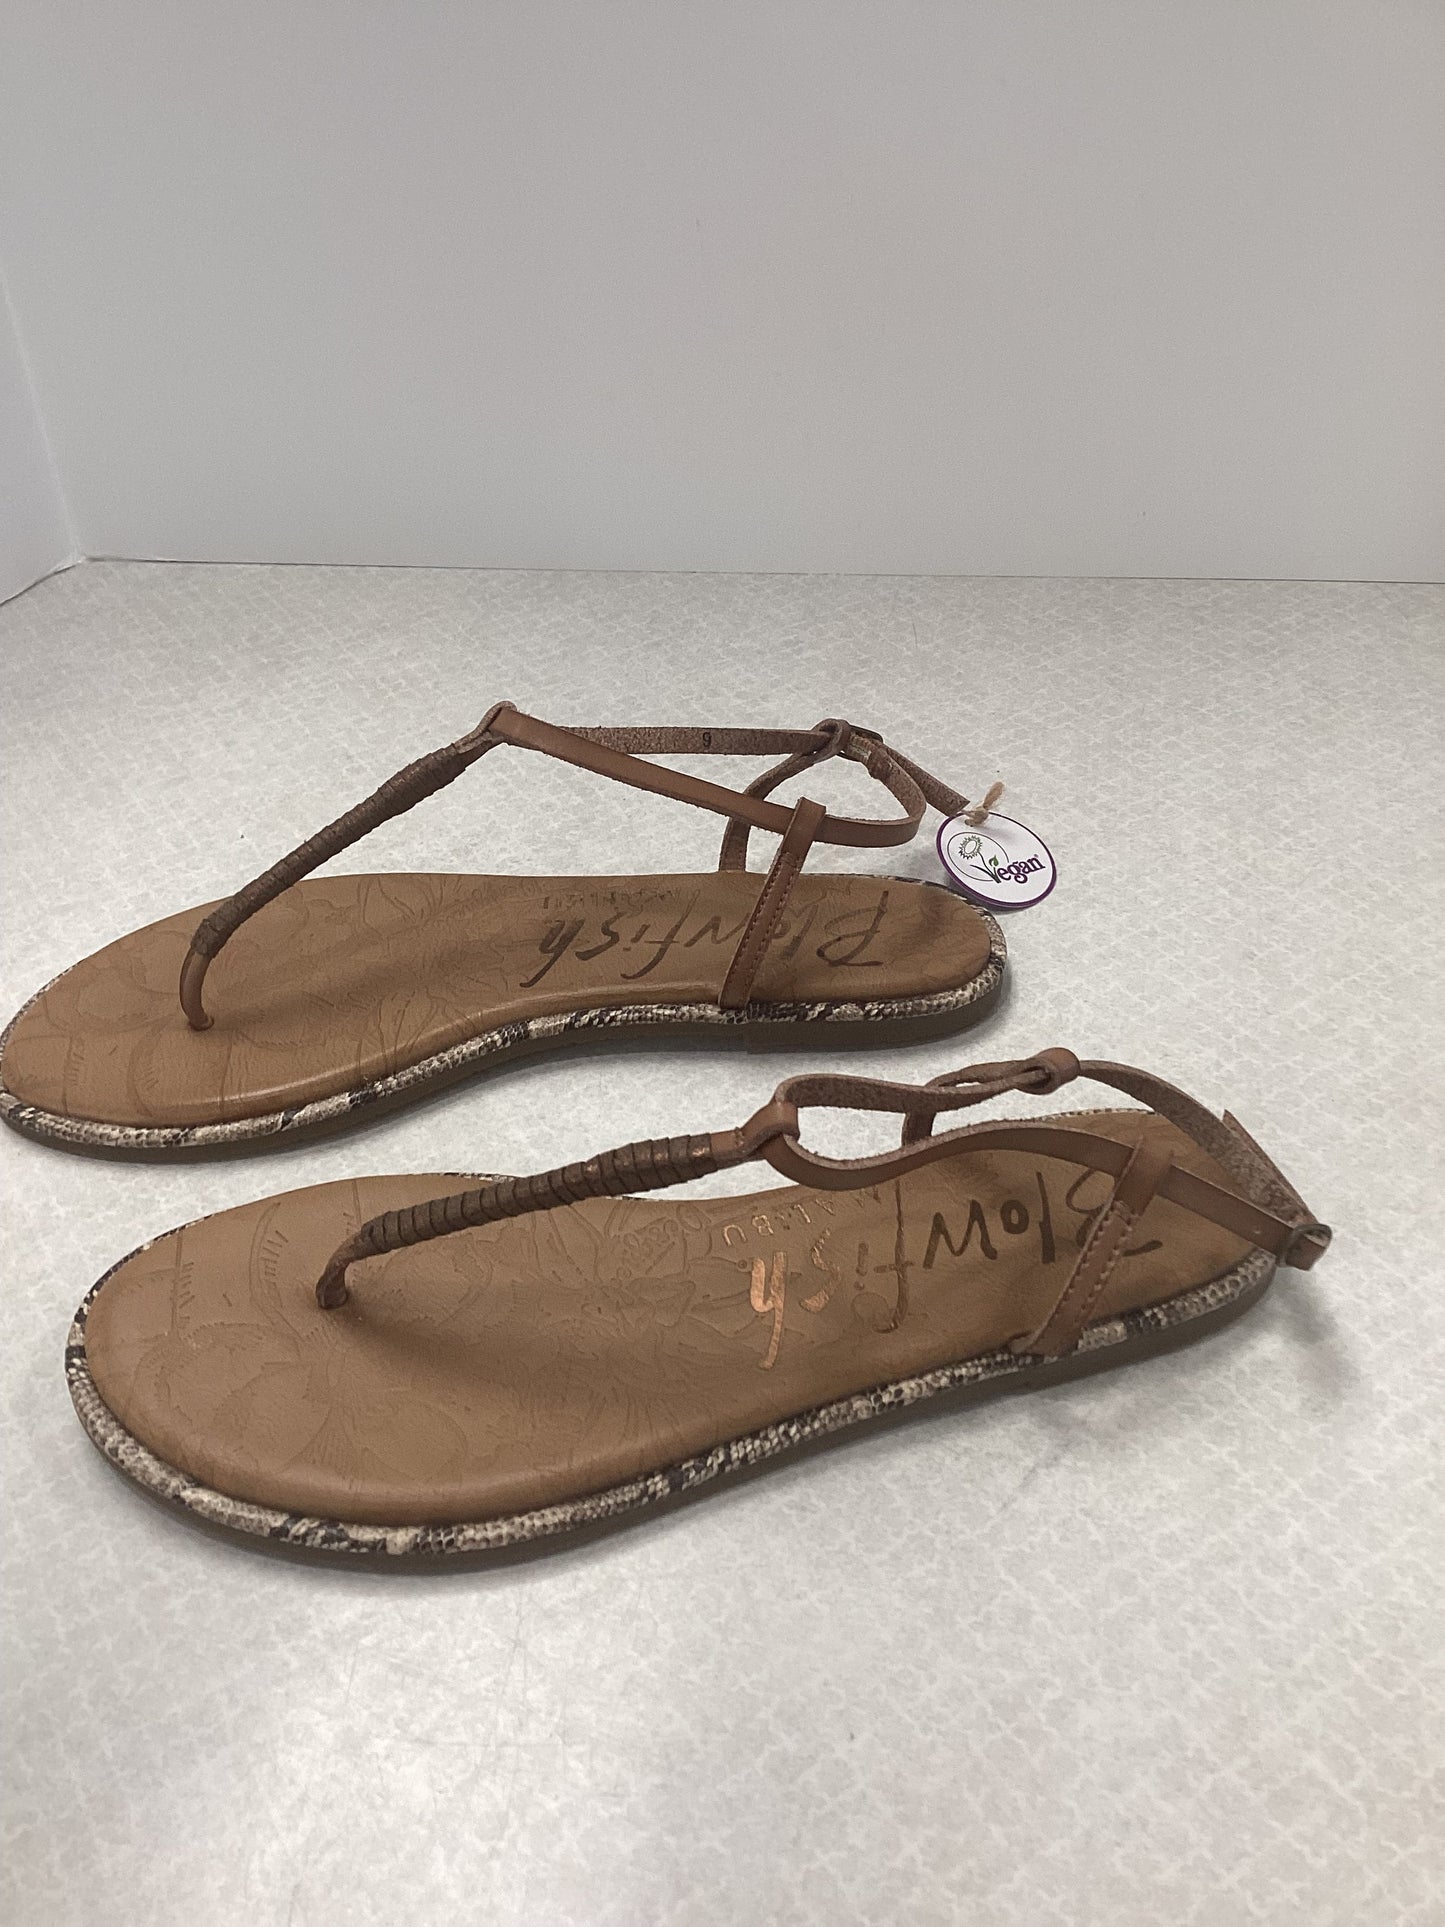 Sandals Flats By Blowfish  Size: 9